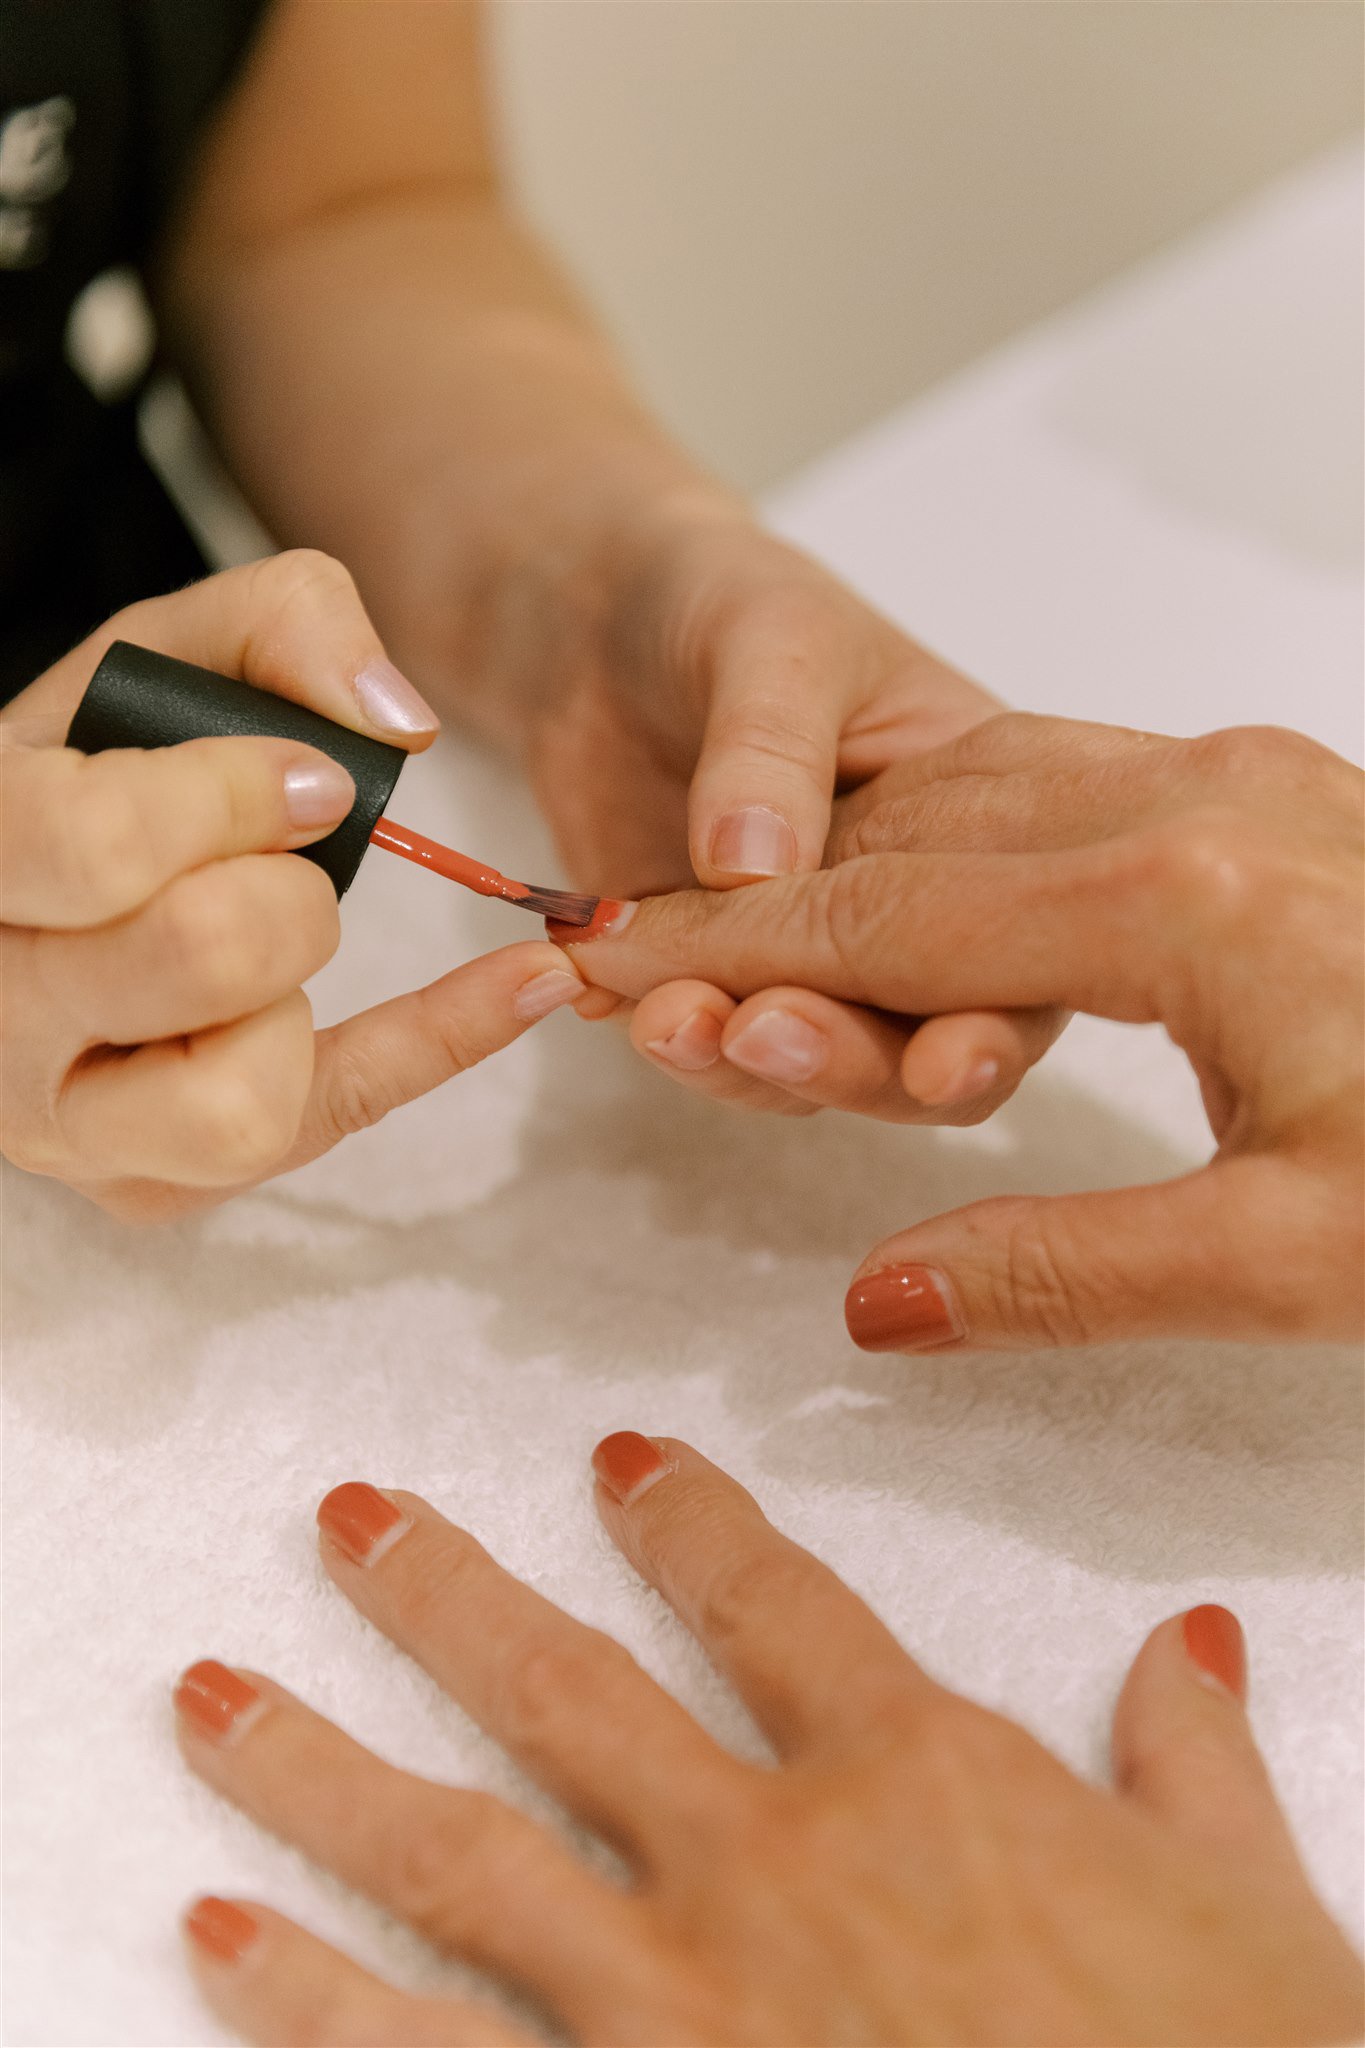 manicure-shellac-nails-pedicure-paraffin-wax-french-manicure-grimsby-niagara-st-catharines-smithville-ontario.jpg